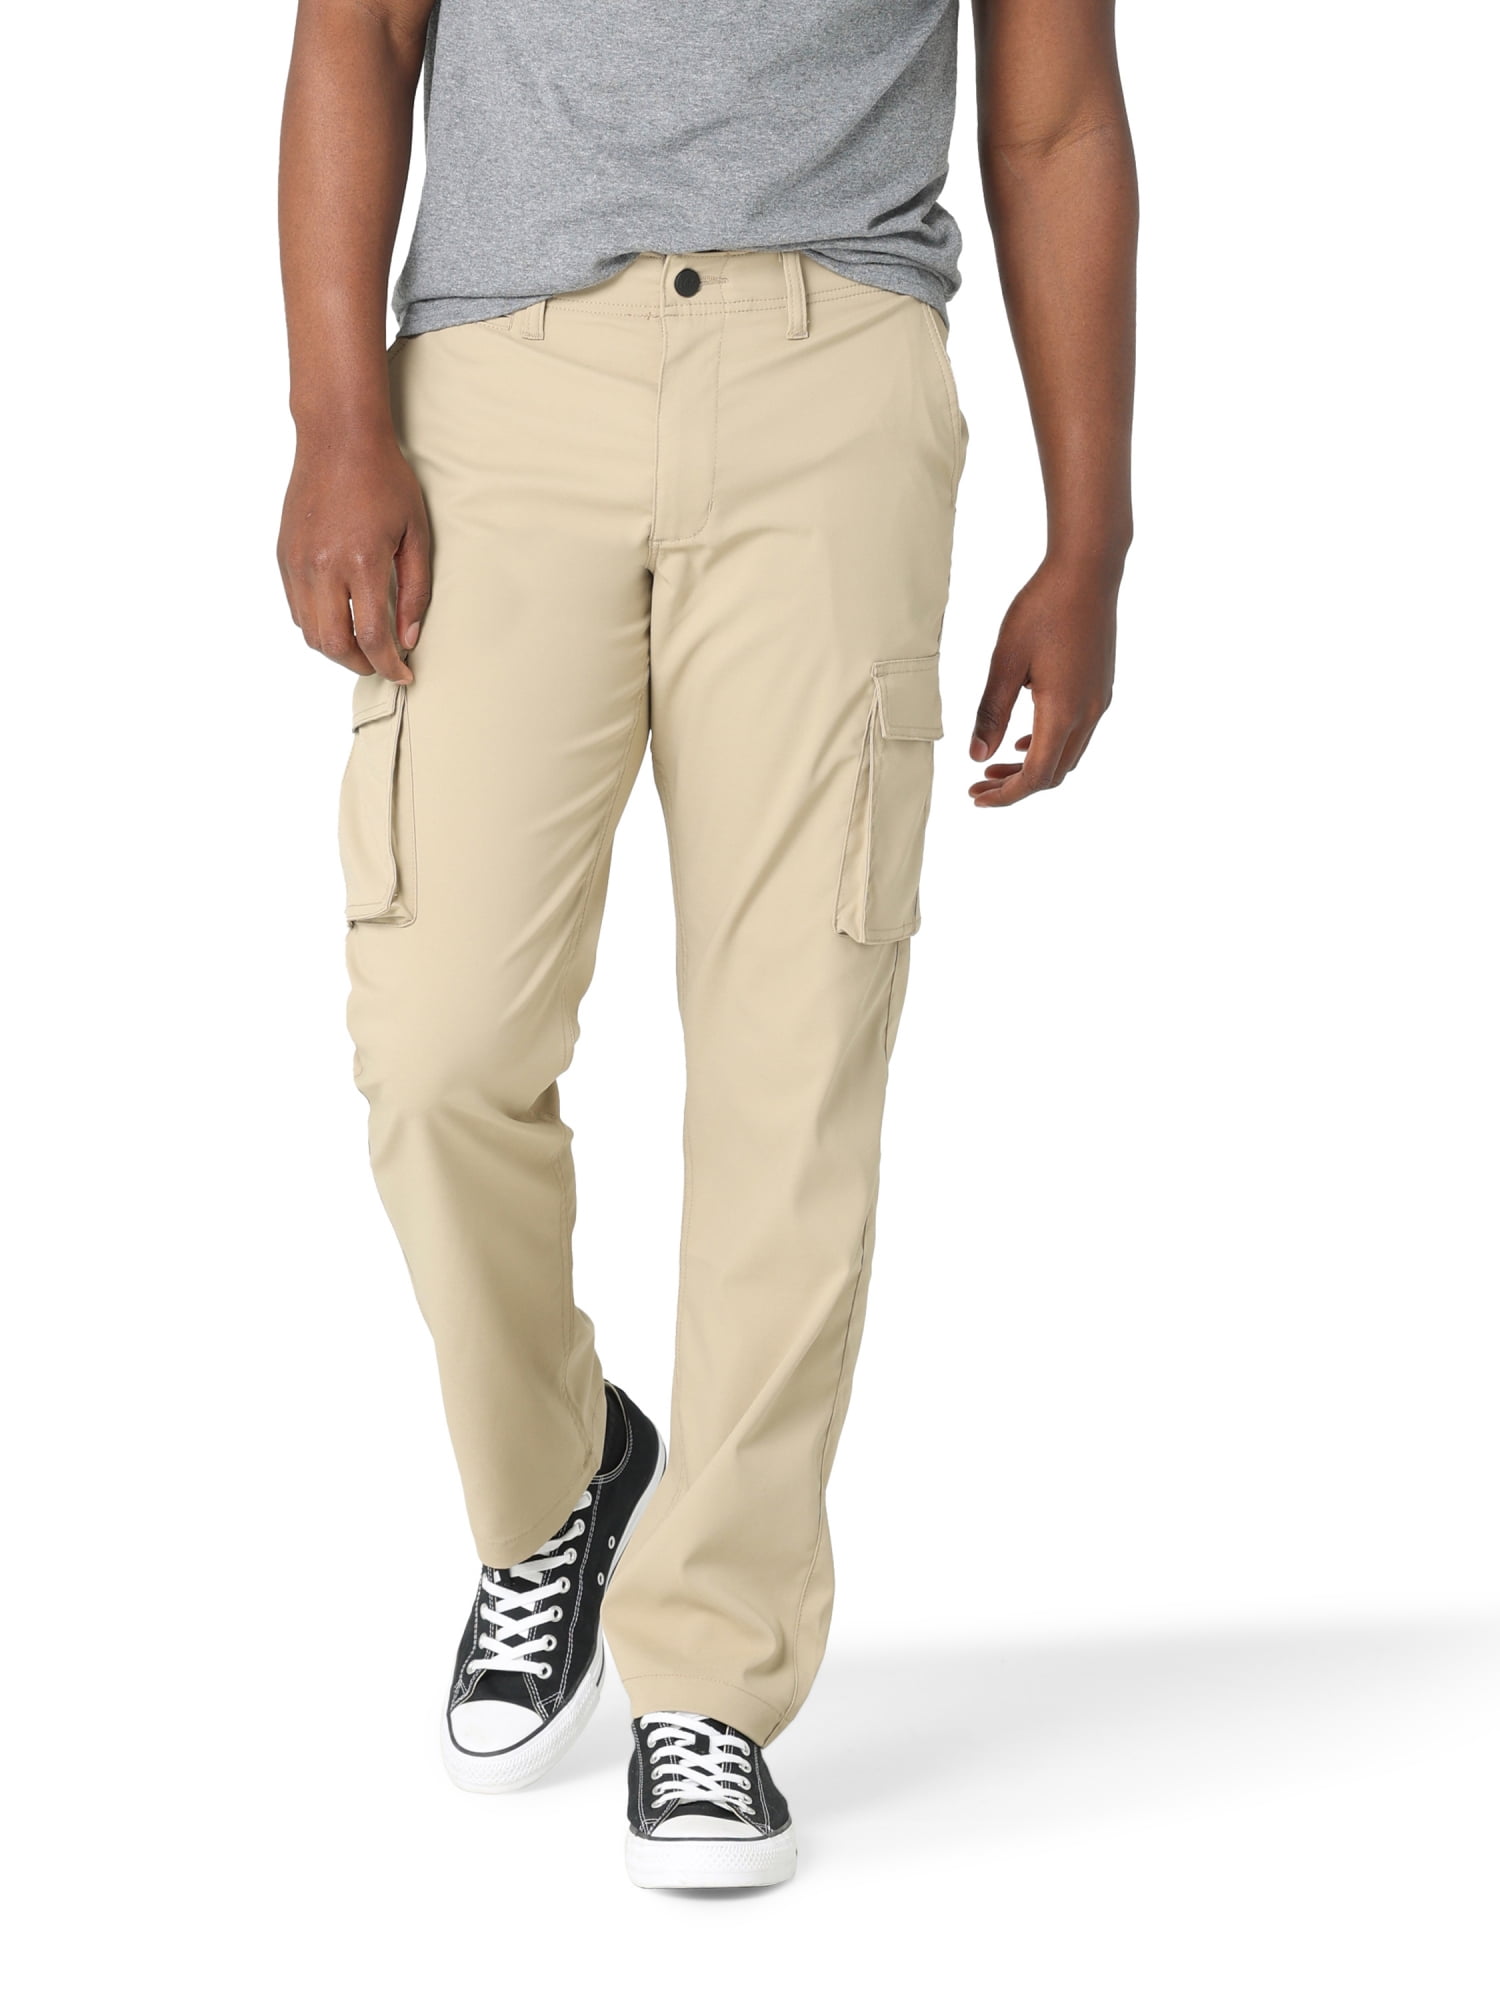 LEE Men Straight Fit Stretch Total Freedom Pants Wrinkle / Stain Resistant  NEW | eBay